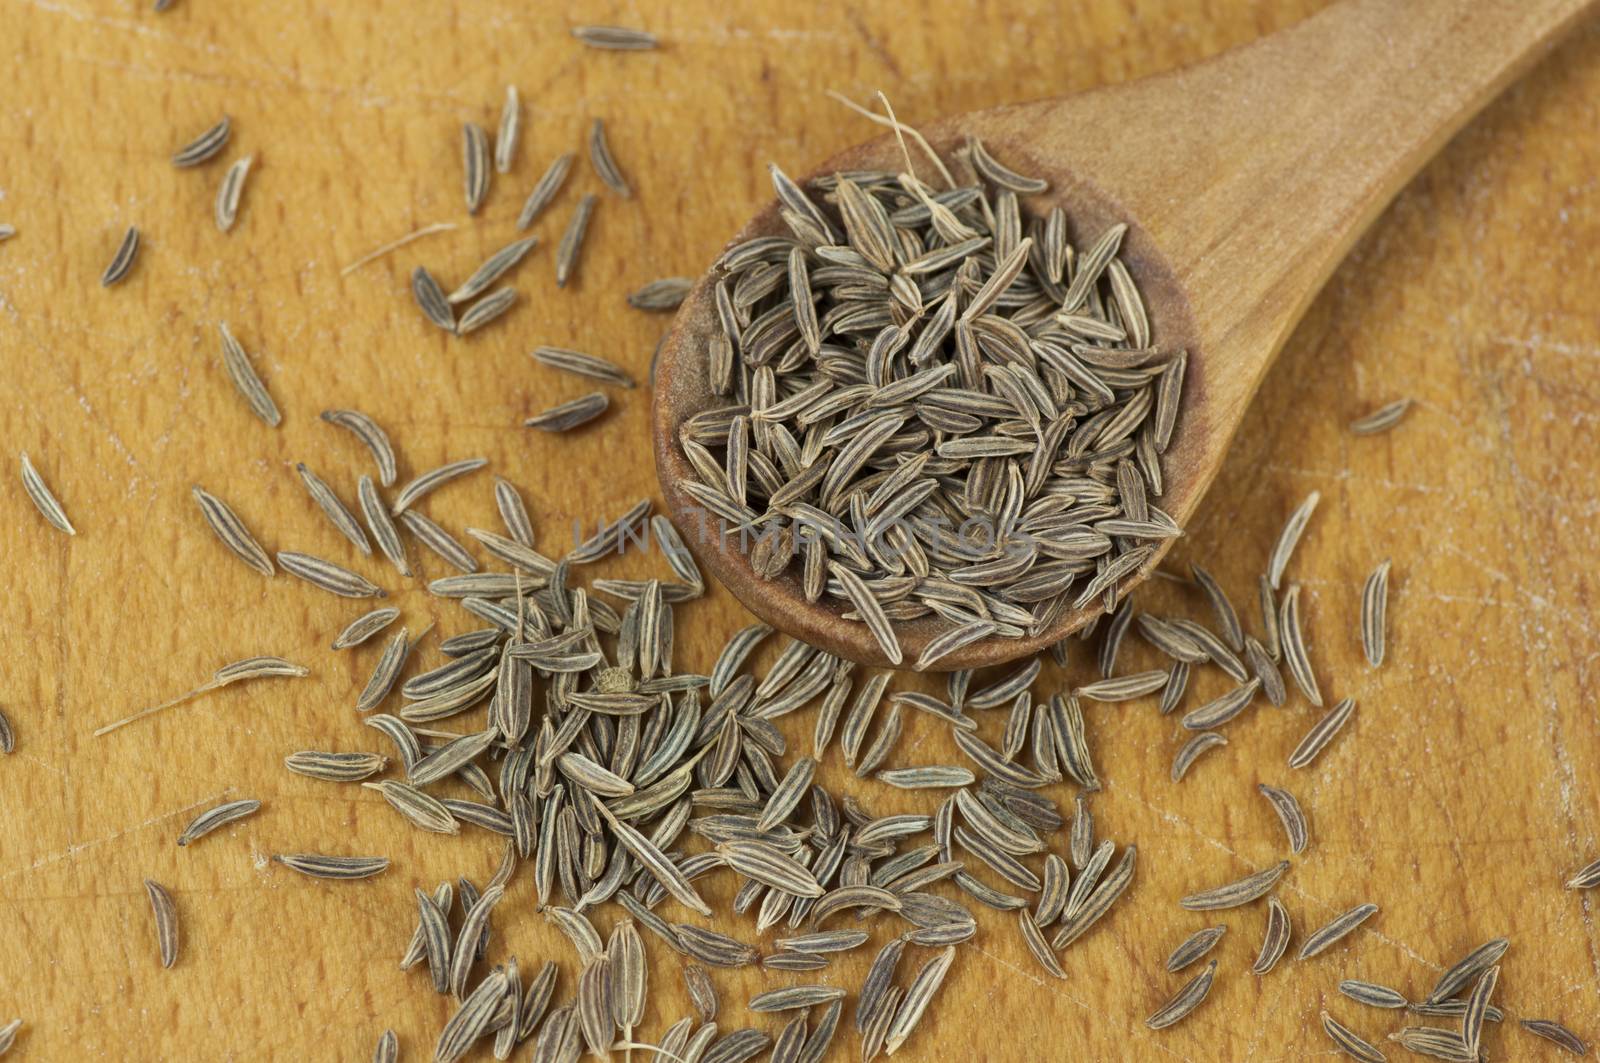 Caraway (Carum carvi) seeds by dred